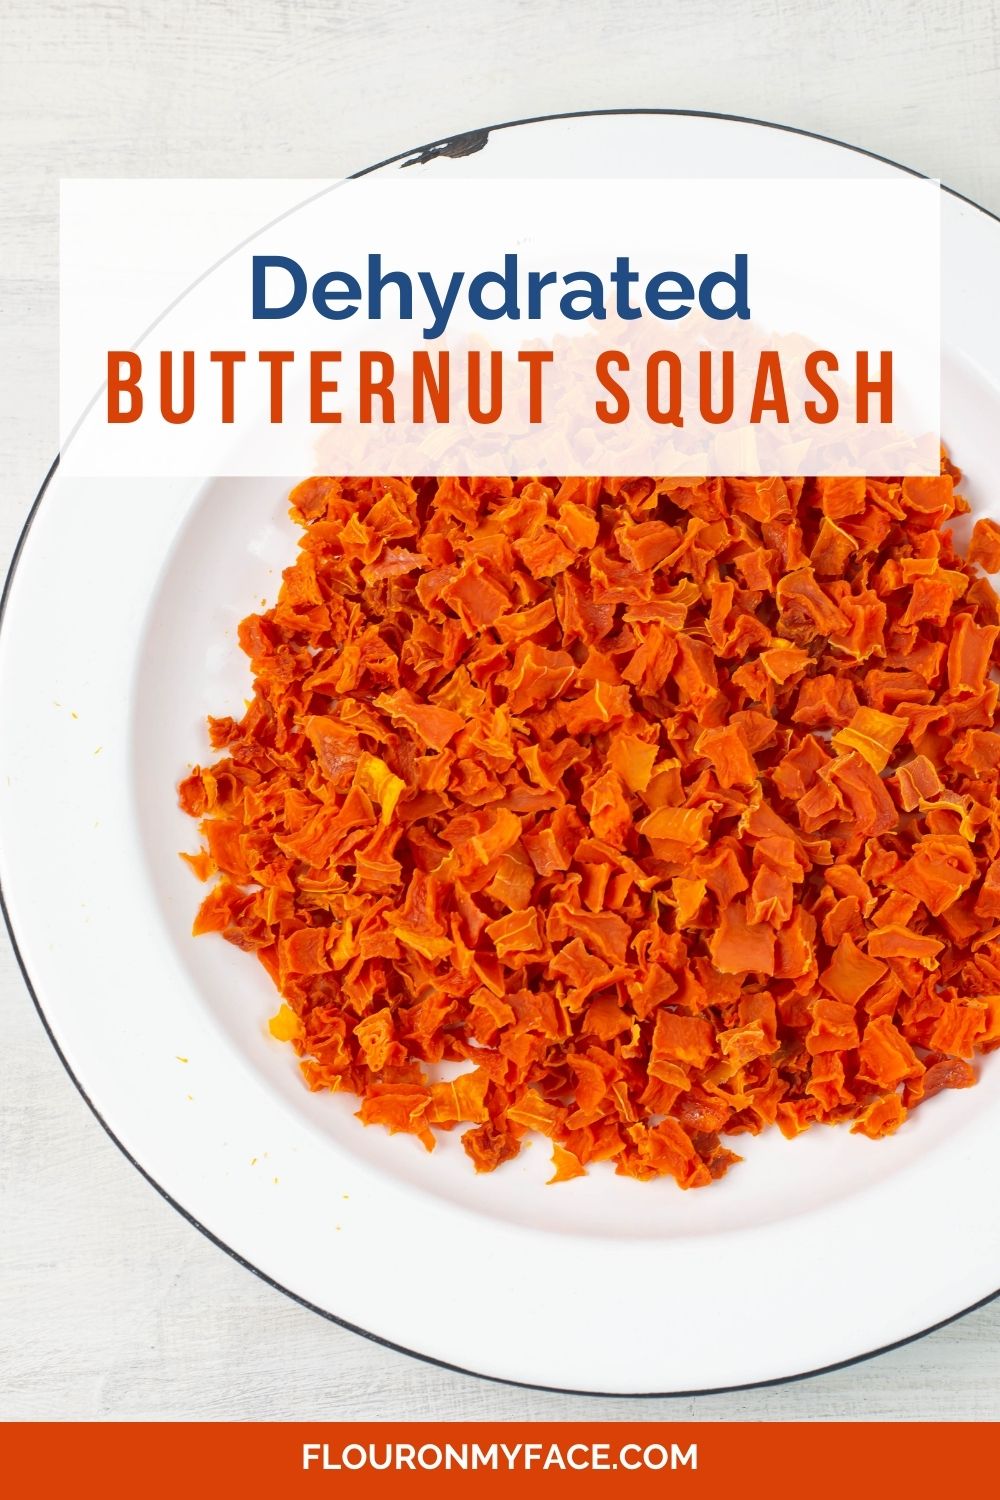 Large enamel bowl filled with dehydrated butternut squash.